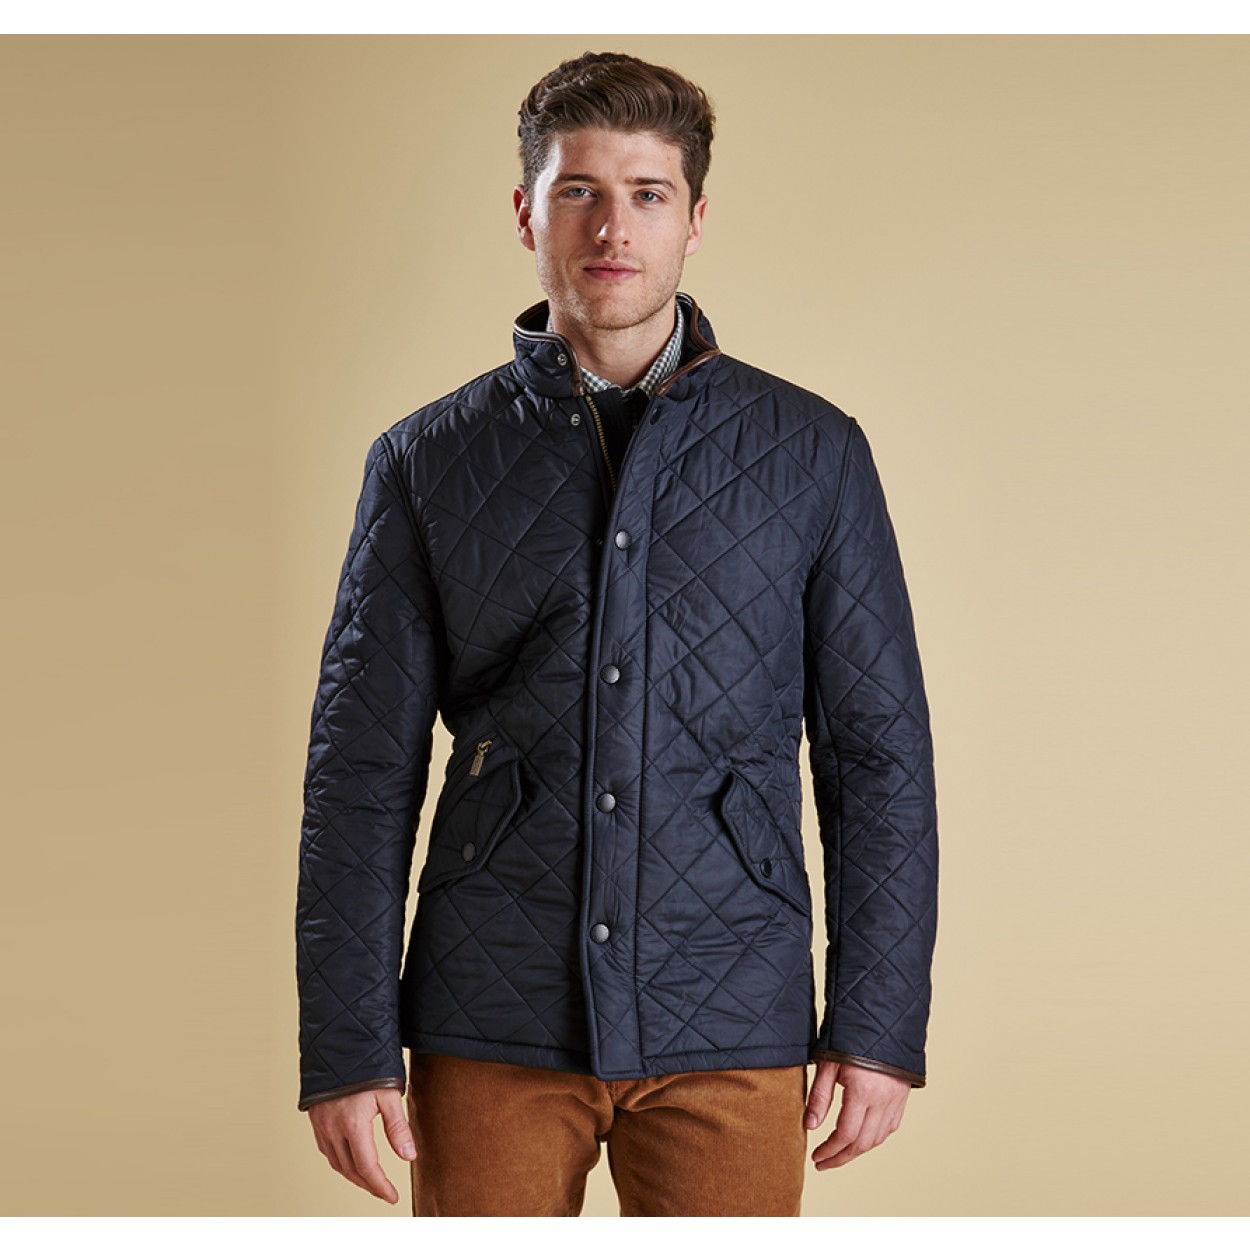 Barbour Powell Jacket Navy - Equestrian World